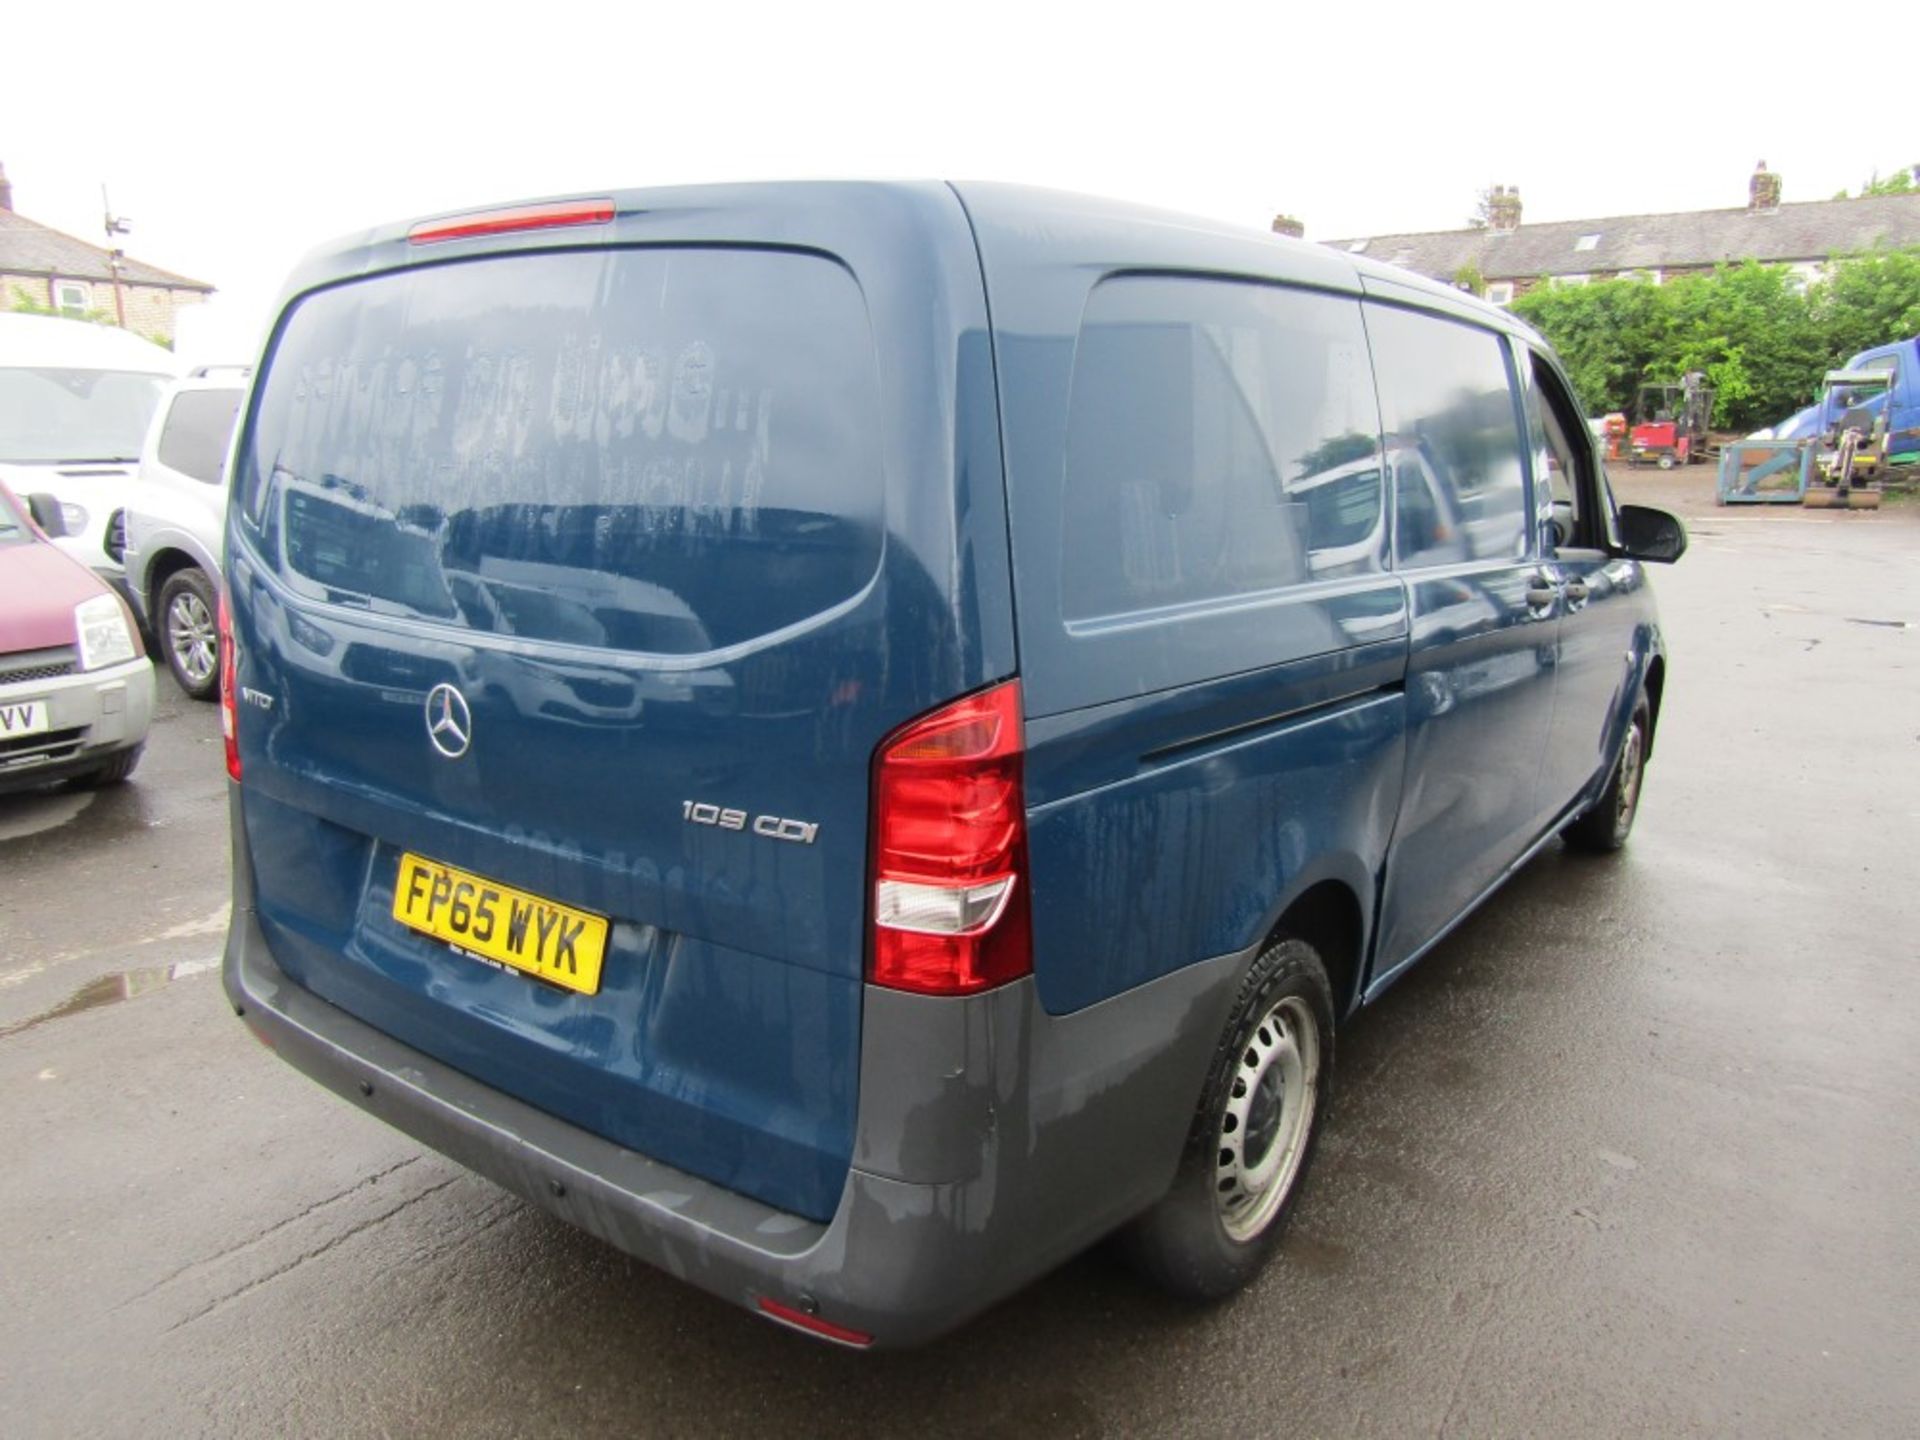 65 reg MERCEDES VITO 109 CDI, 1ST REG 12/15, TEST 12/22, 257794M, V5 HERE, 2 FORMER KEEPERS [NO - Image 4 of 7